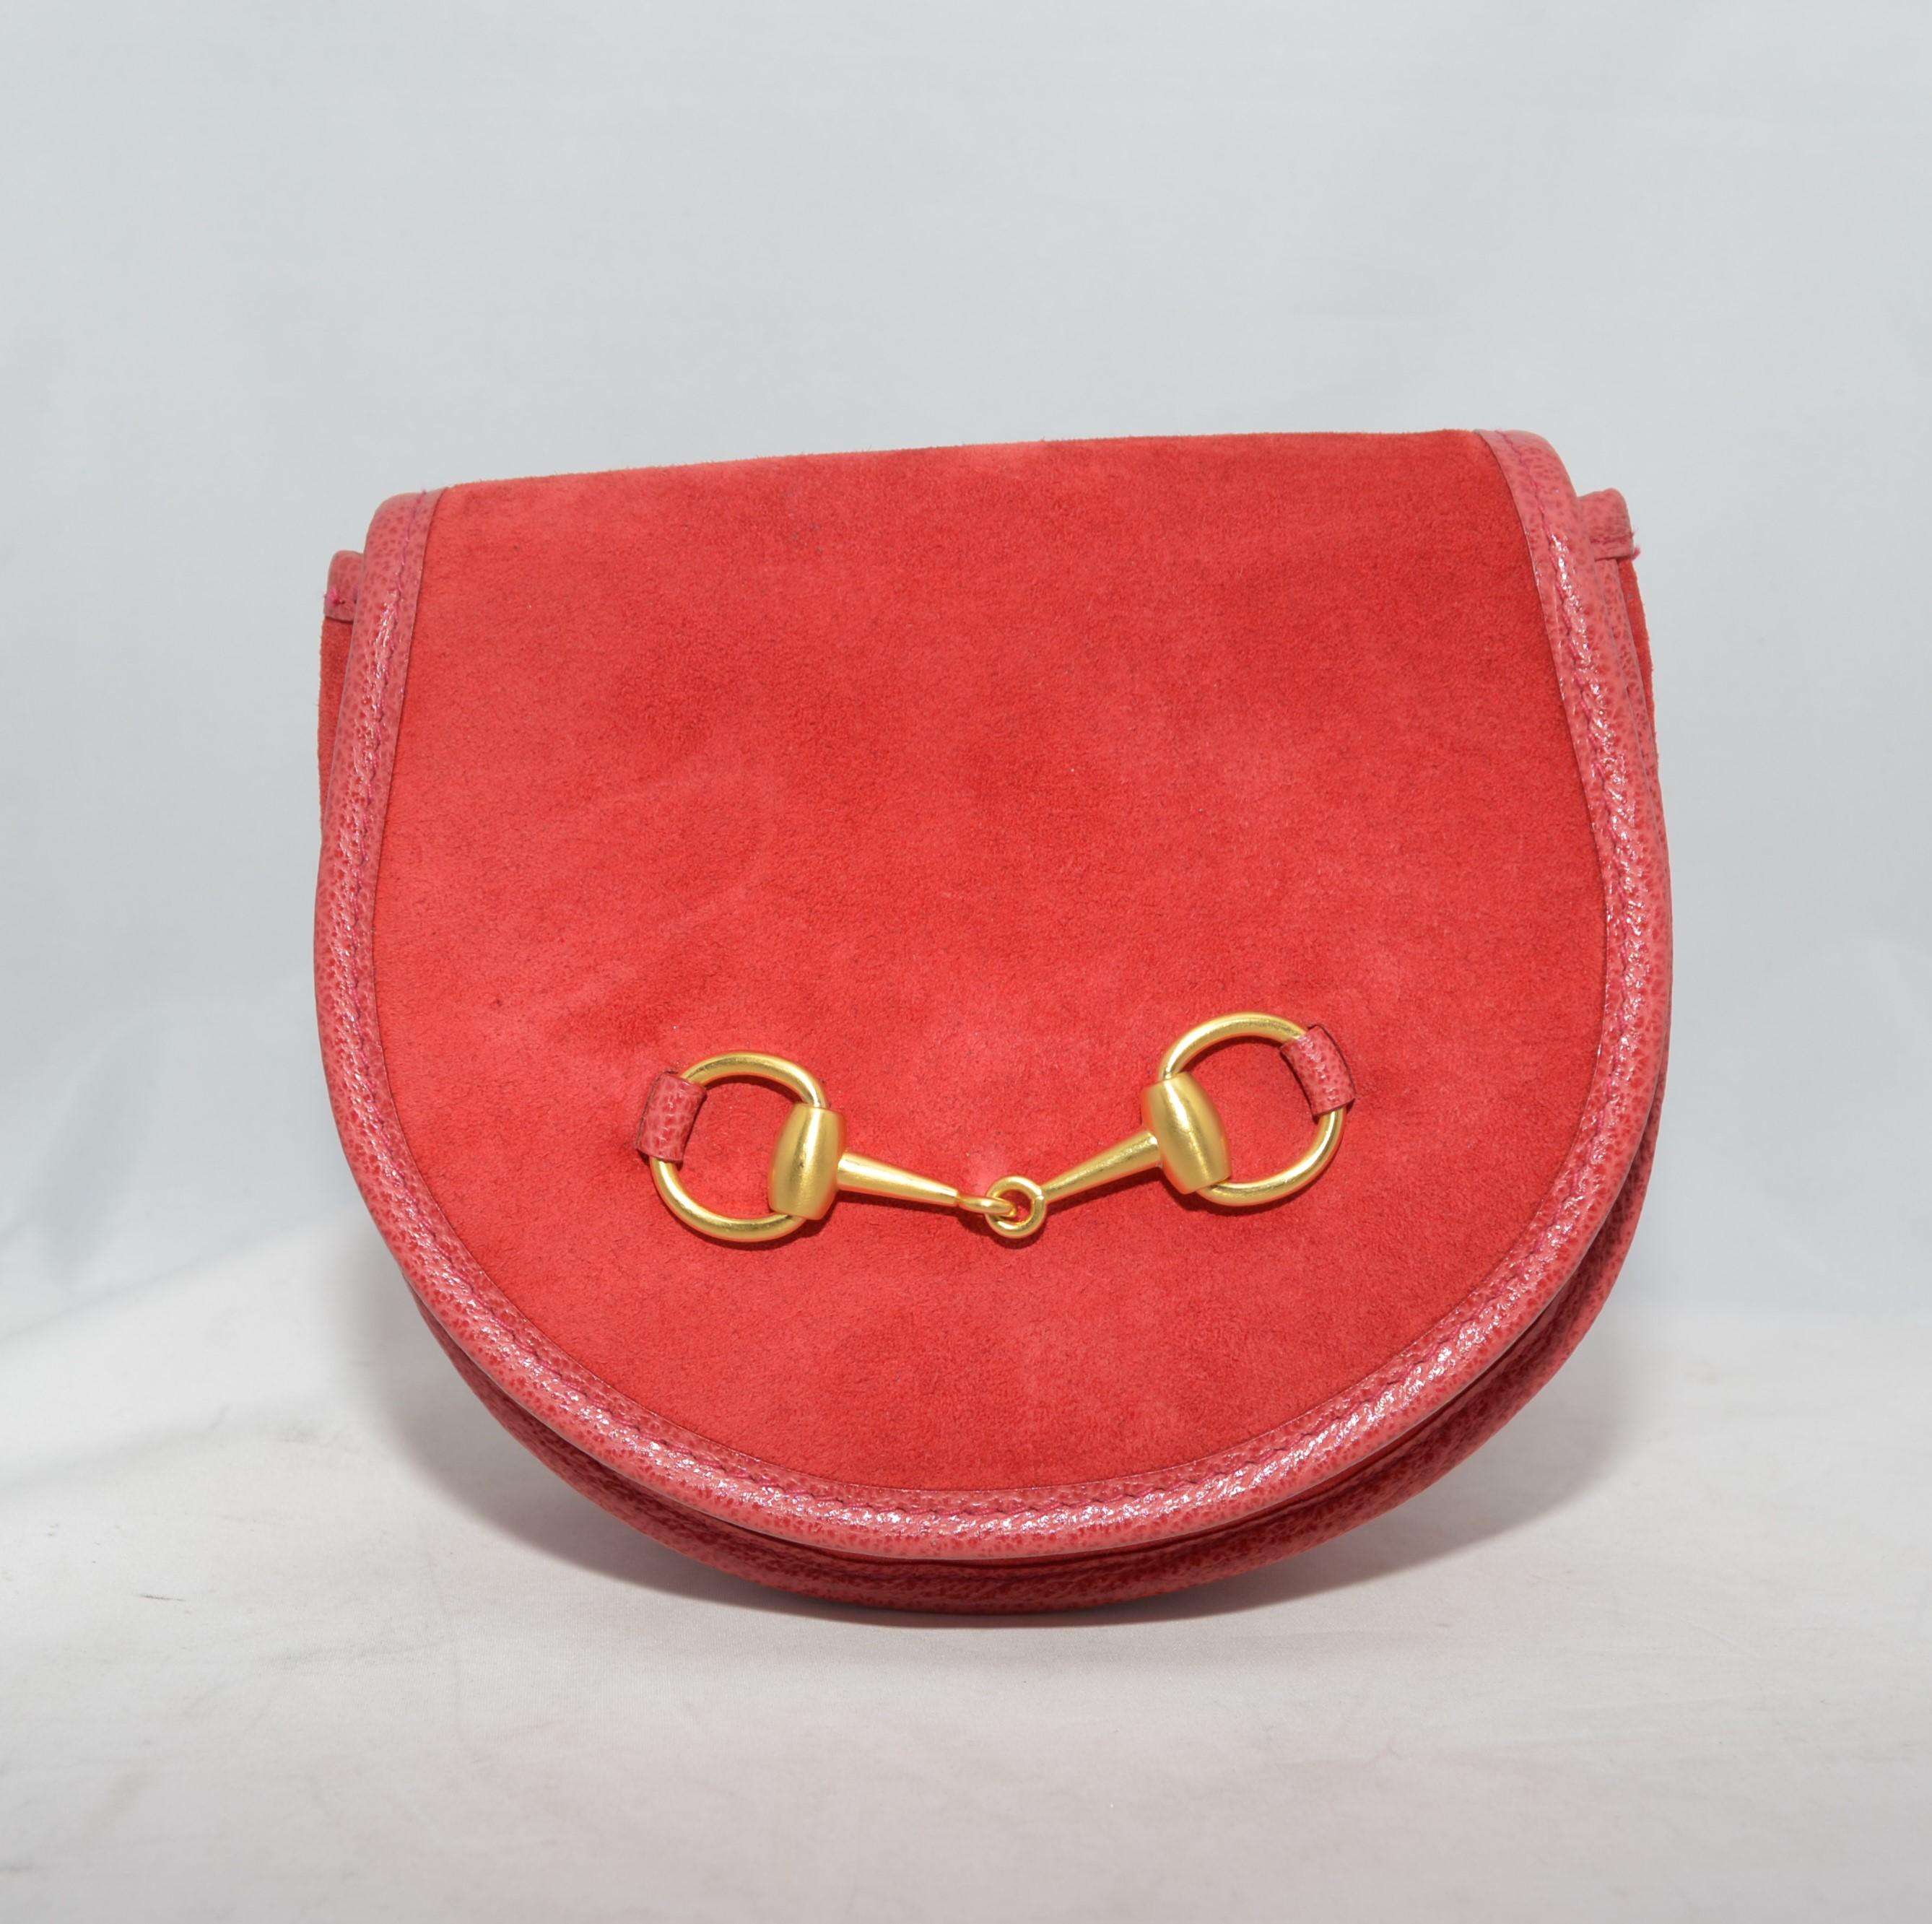 Vintage Gucci belt bag featured in red suede leather with a gold-tone horsebit detail at the front, flap front with a snap button closure, and a full leather lining. Belt measures 37 inches long and 1-inch wide.  Bag is in great vintage condition